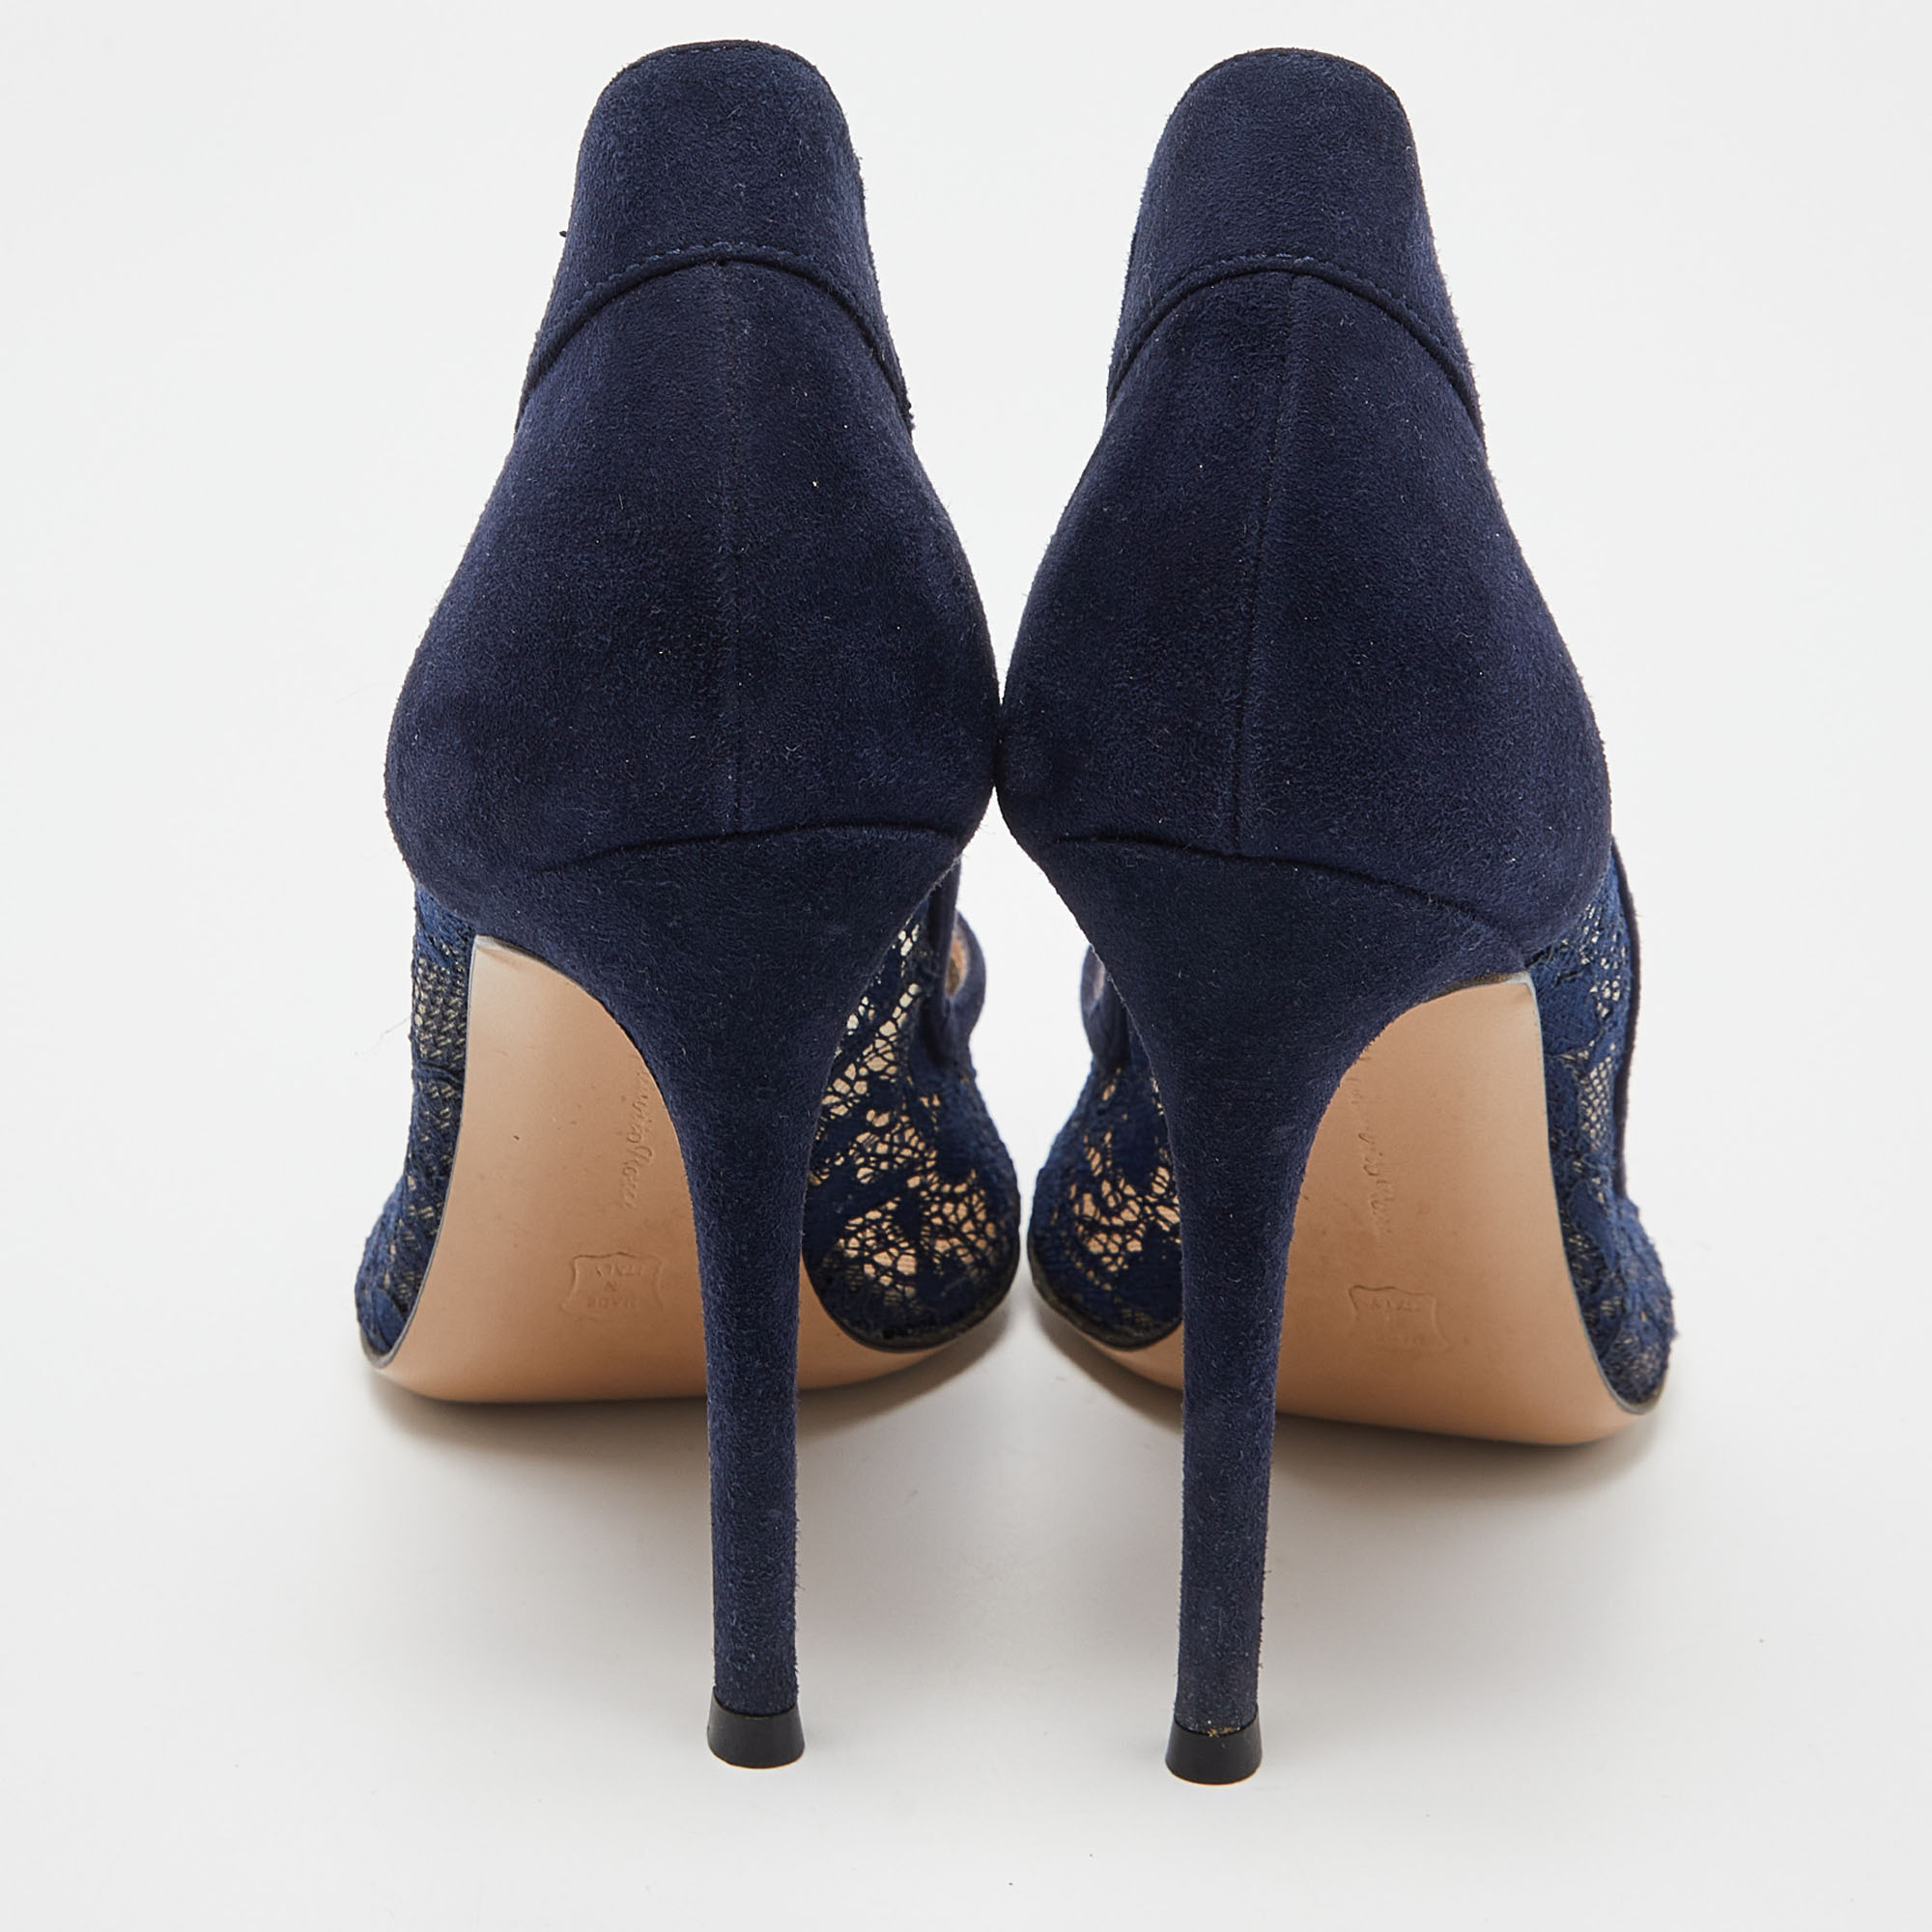 Gianvito Rossi Navy Blue Lace And Suede Pumps Size 36